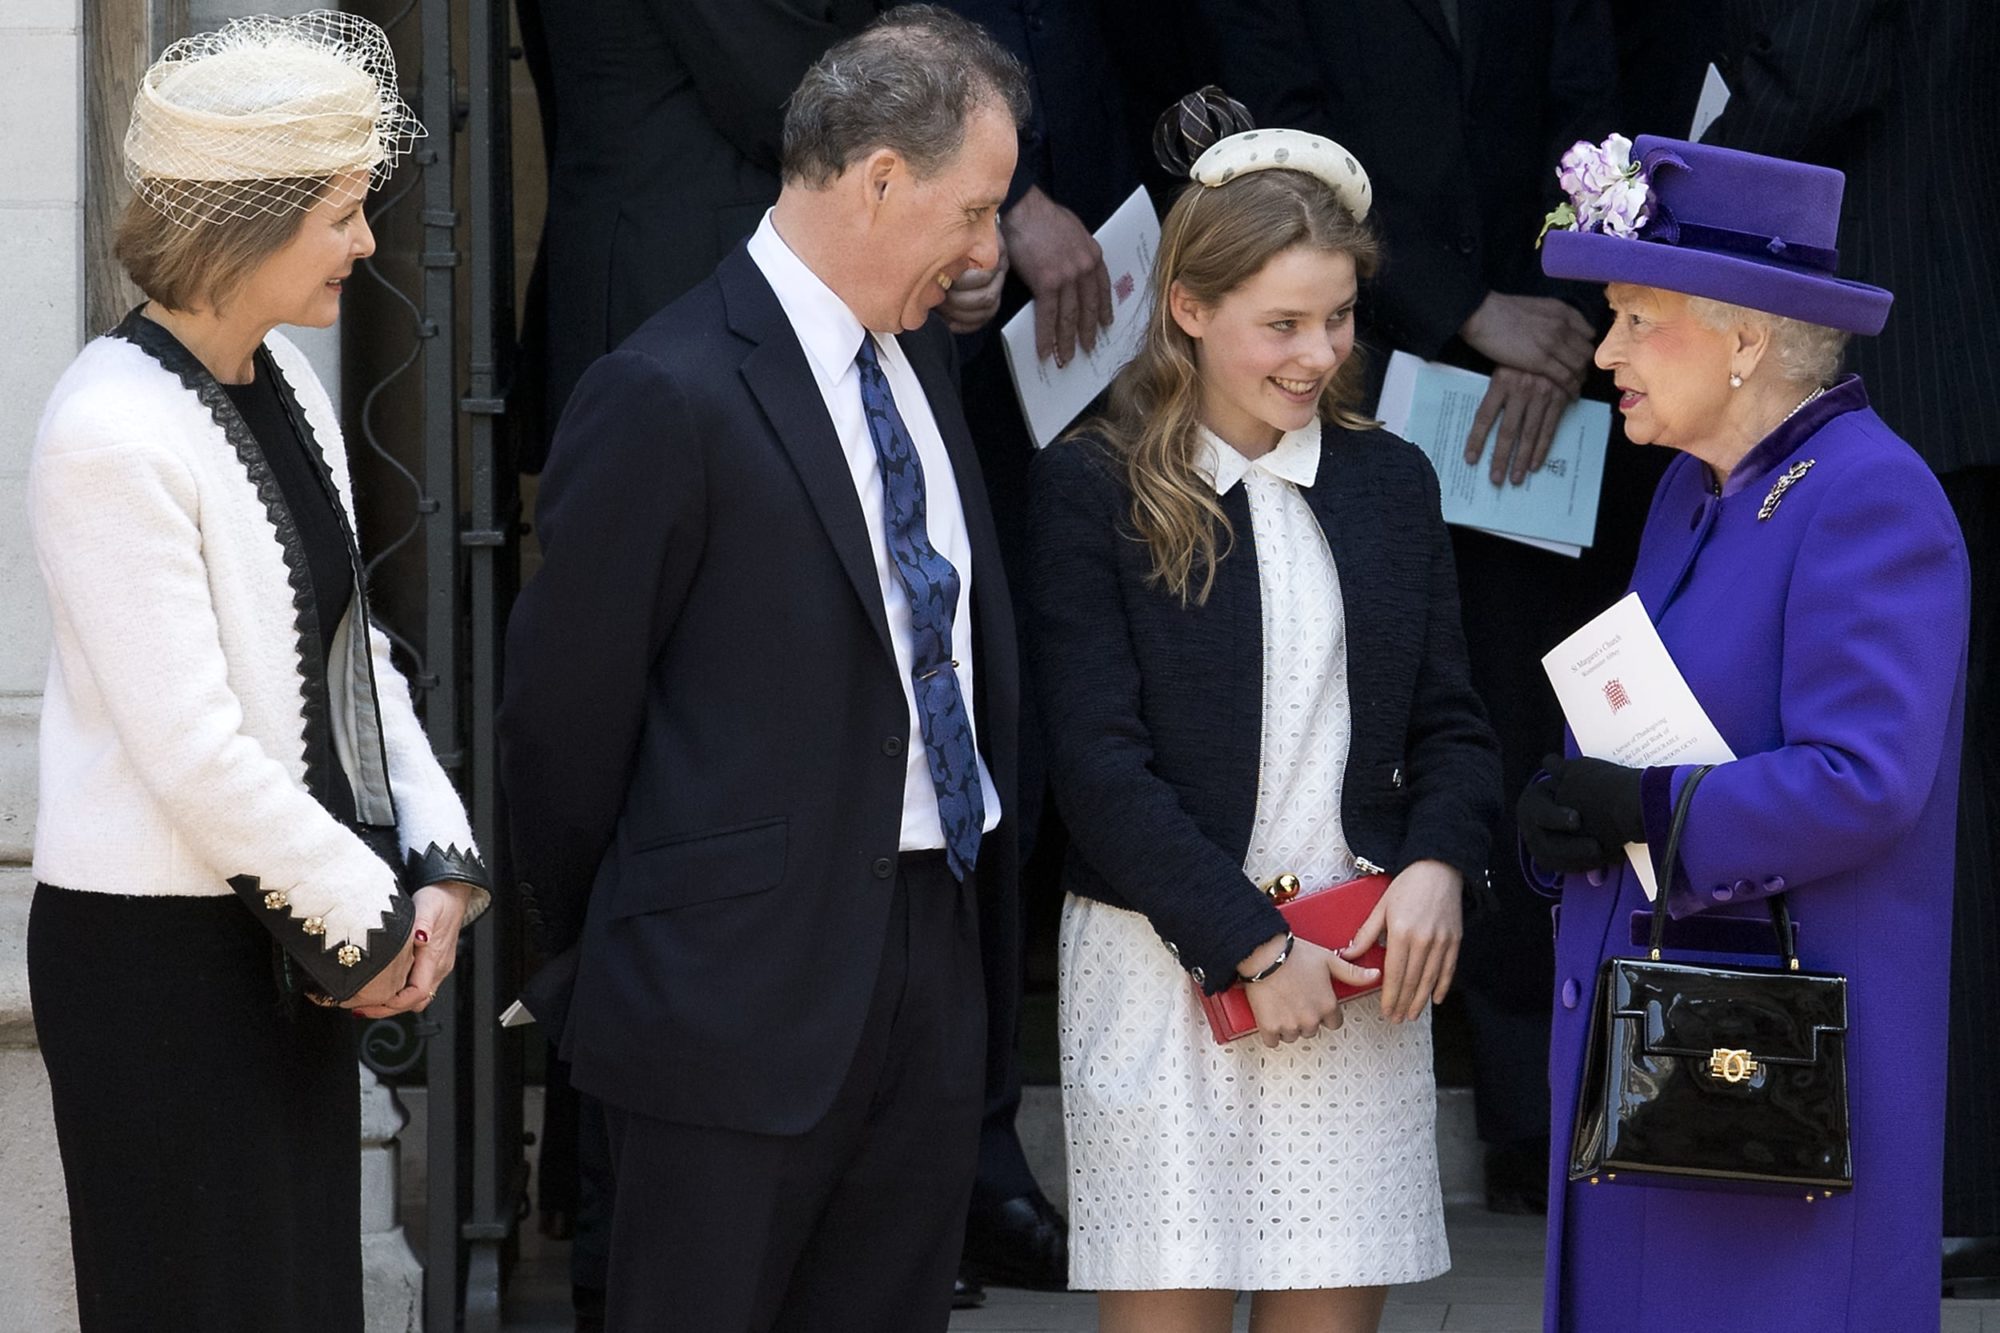 Britain's Queen Elizabeth speaks to Serena Armstrong-Jones, David Armstrong-Jones, and Margarita Armstrong-Jones after a Service of Thanksgiving for Lord Snowdon, at Westminster Abbey in London, Britain April 7, 2017.  REUTERS/Justin Tallis/Pool